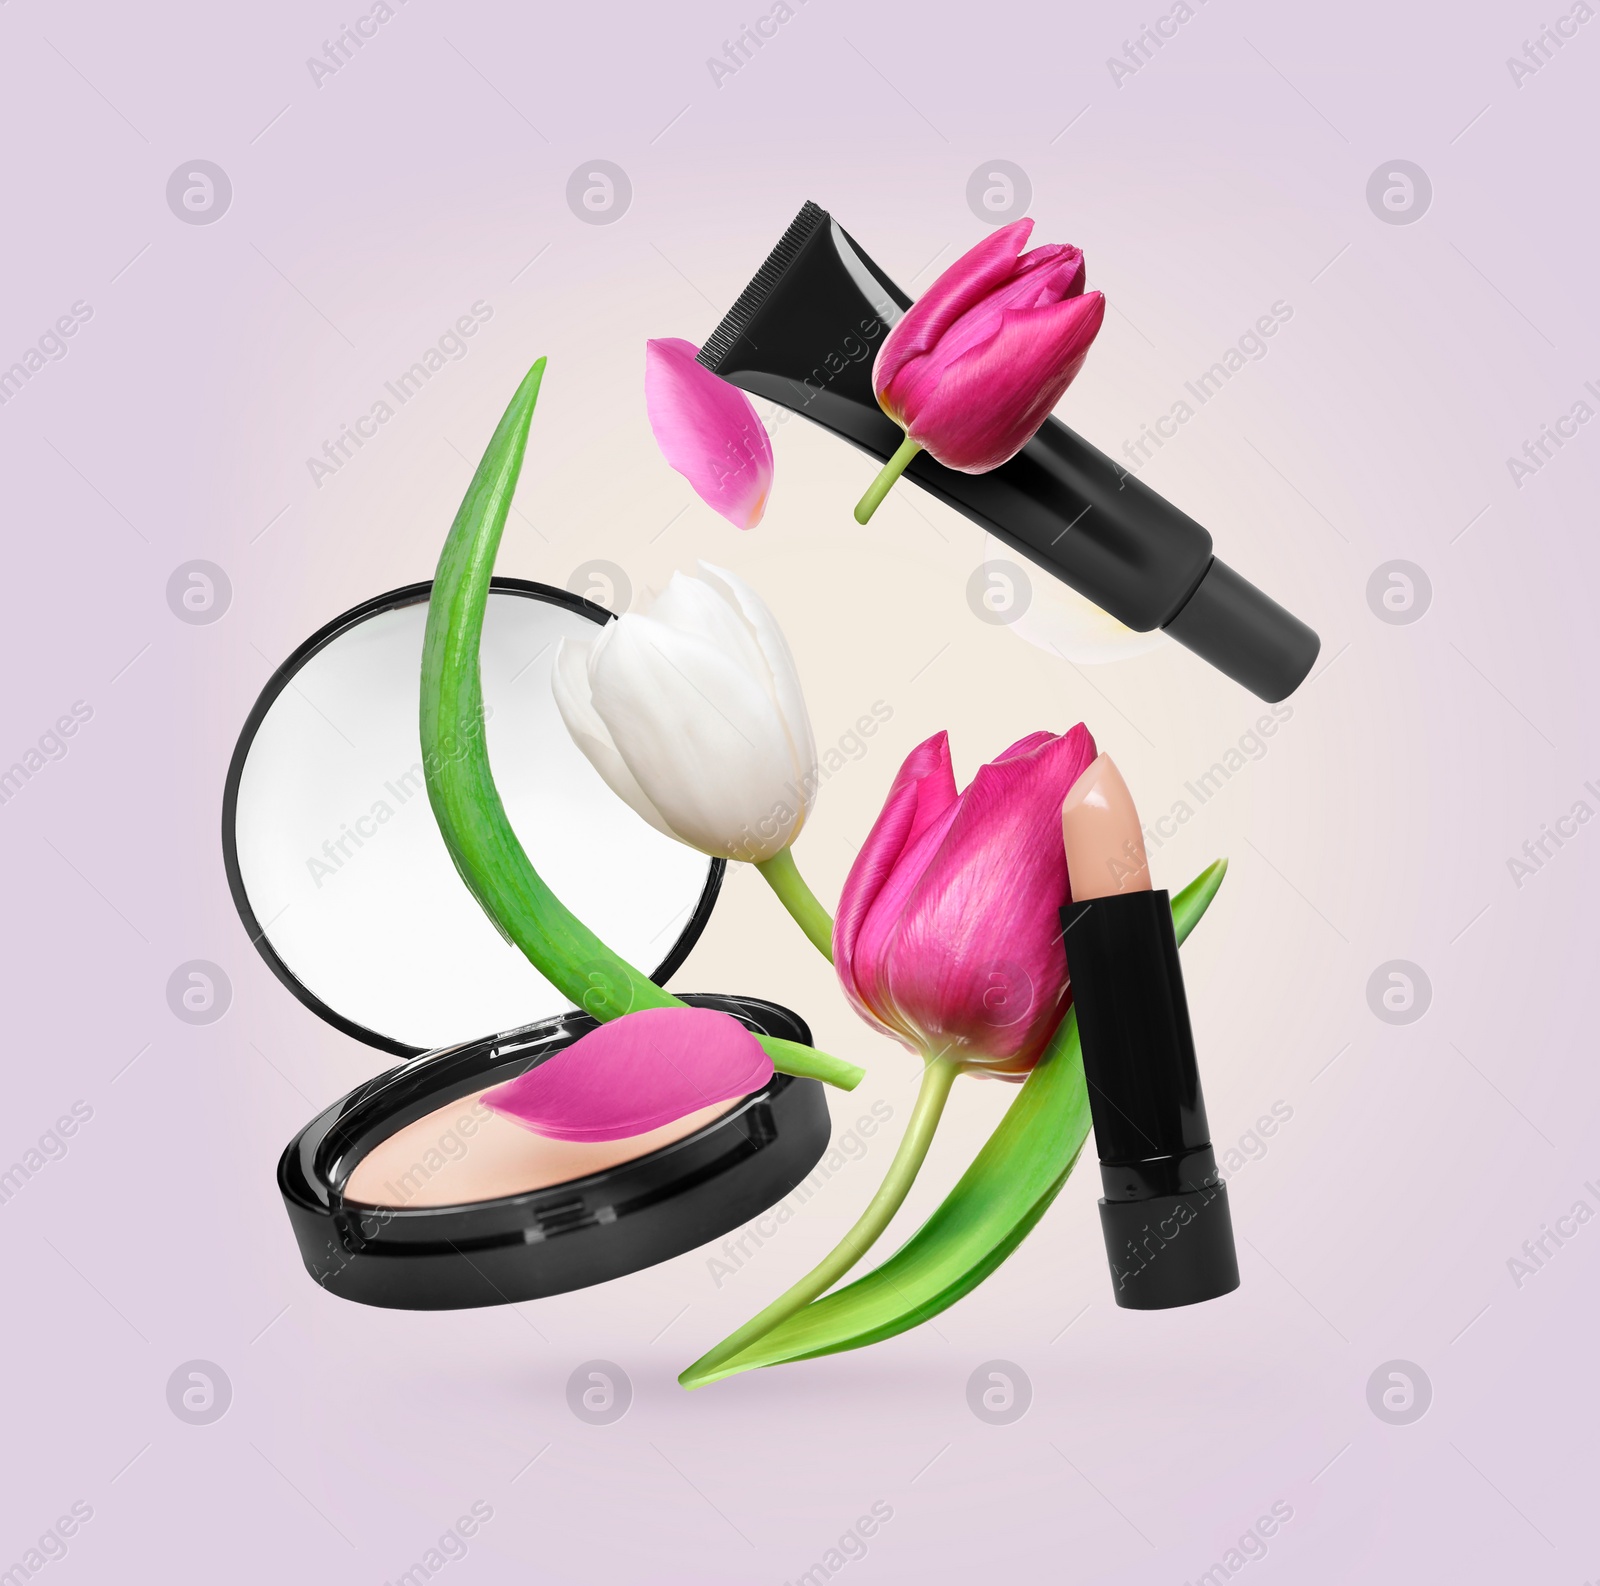 Image of Spring flowers and makeup products in air on pale violet background